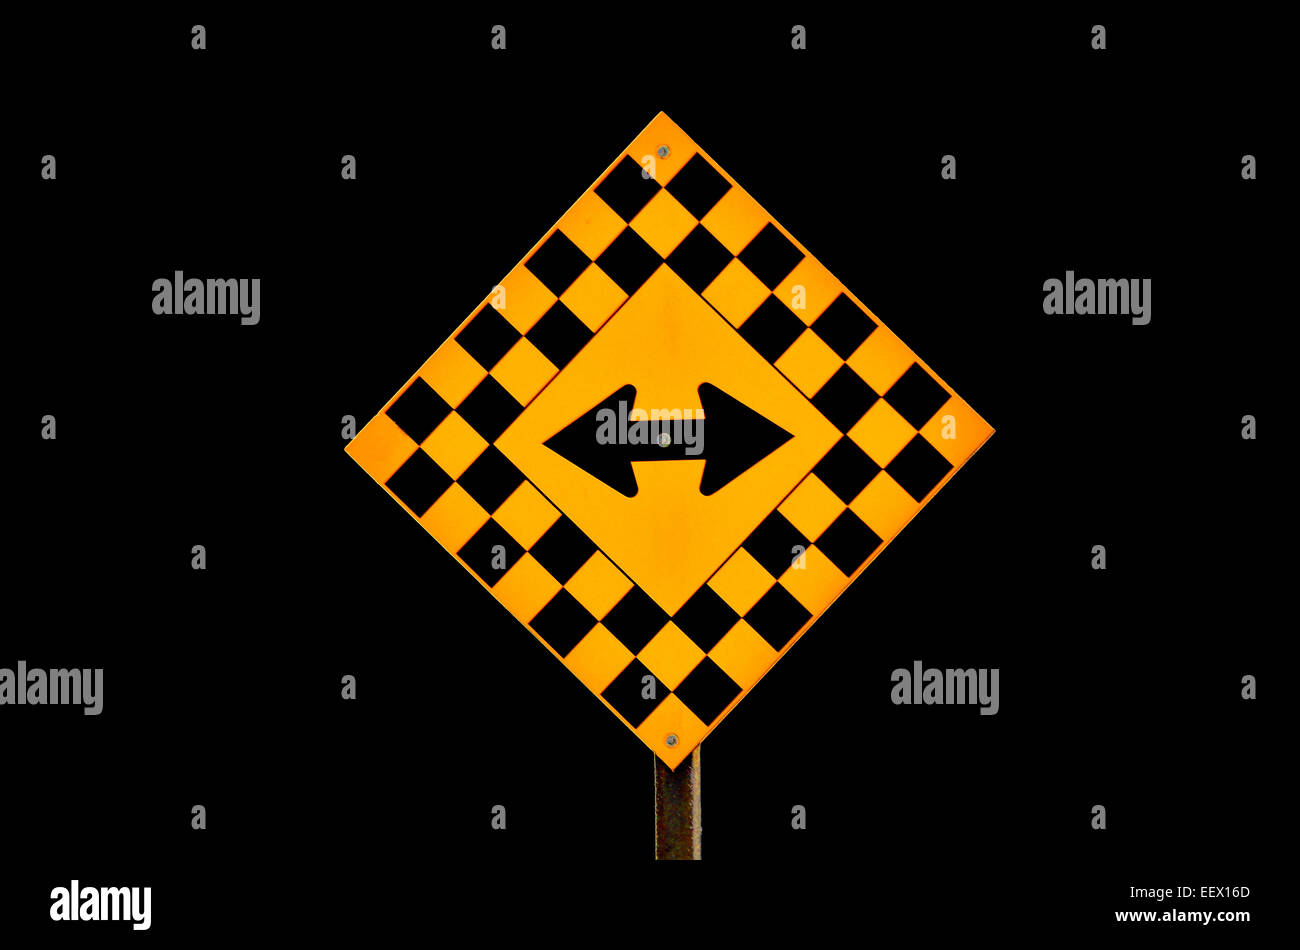 A black and yellow highway sign with an arrow showing two ways to travel on a black background. Stock Photo